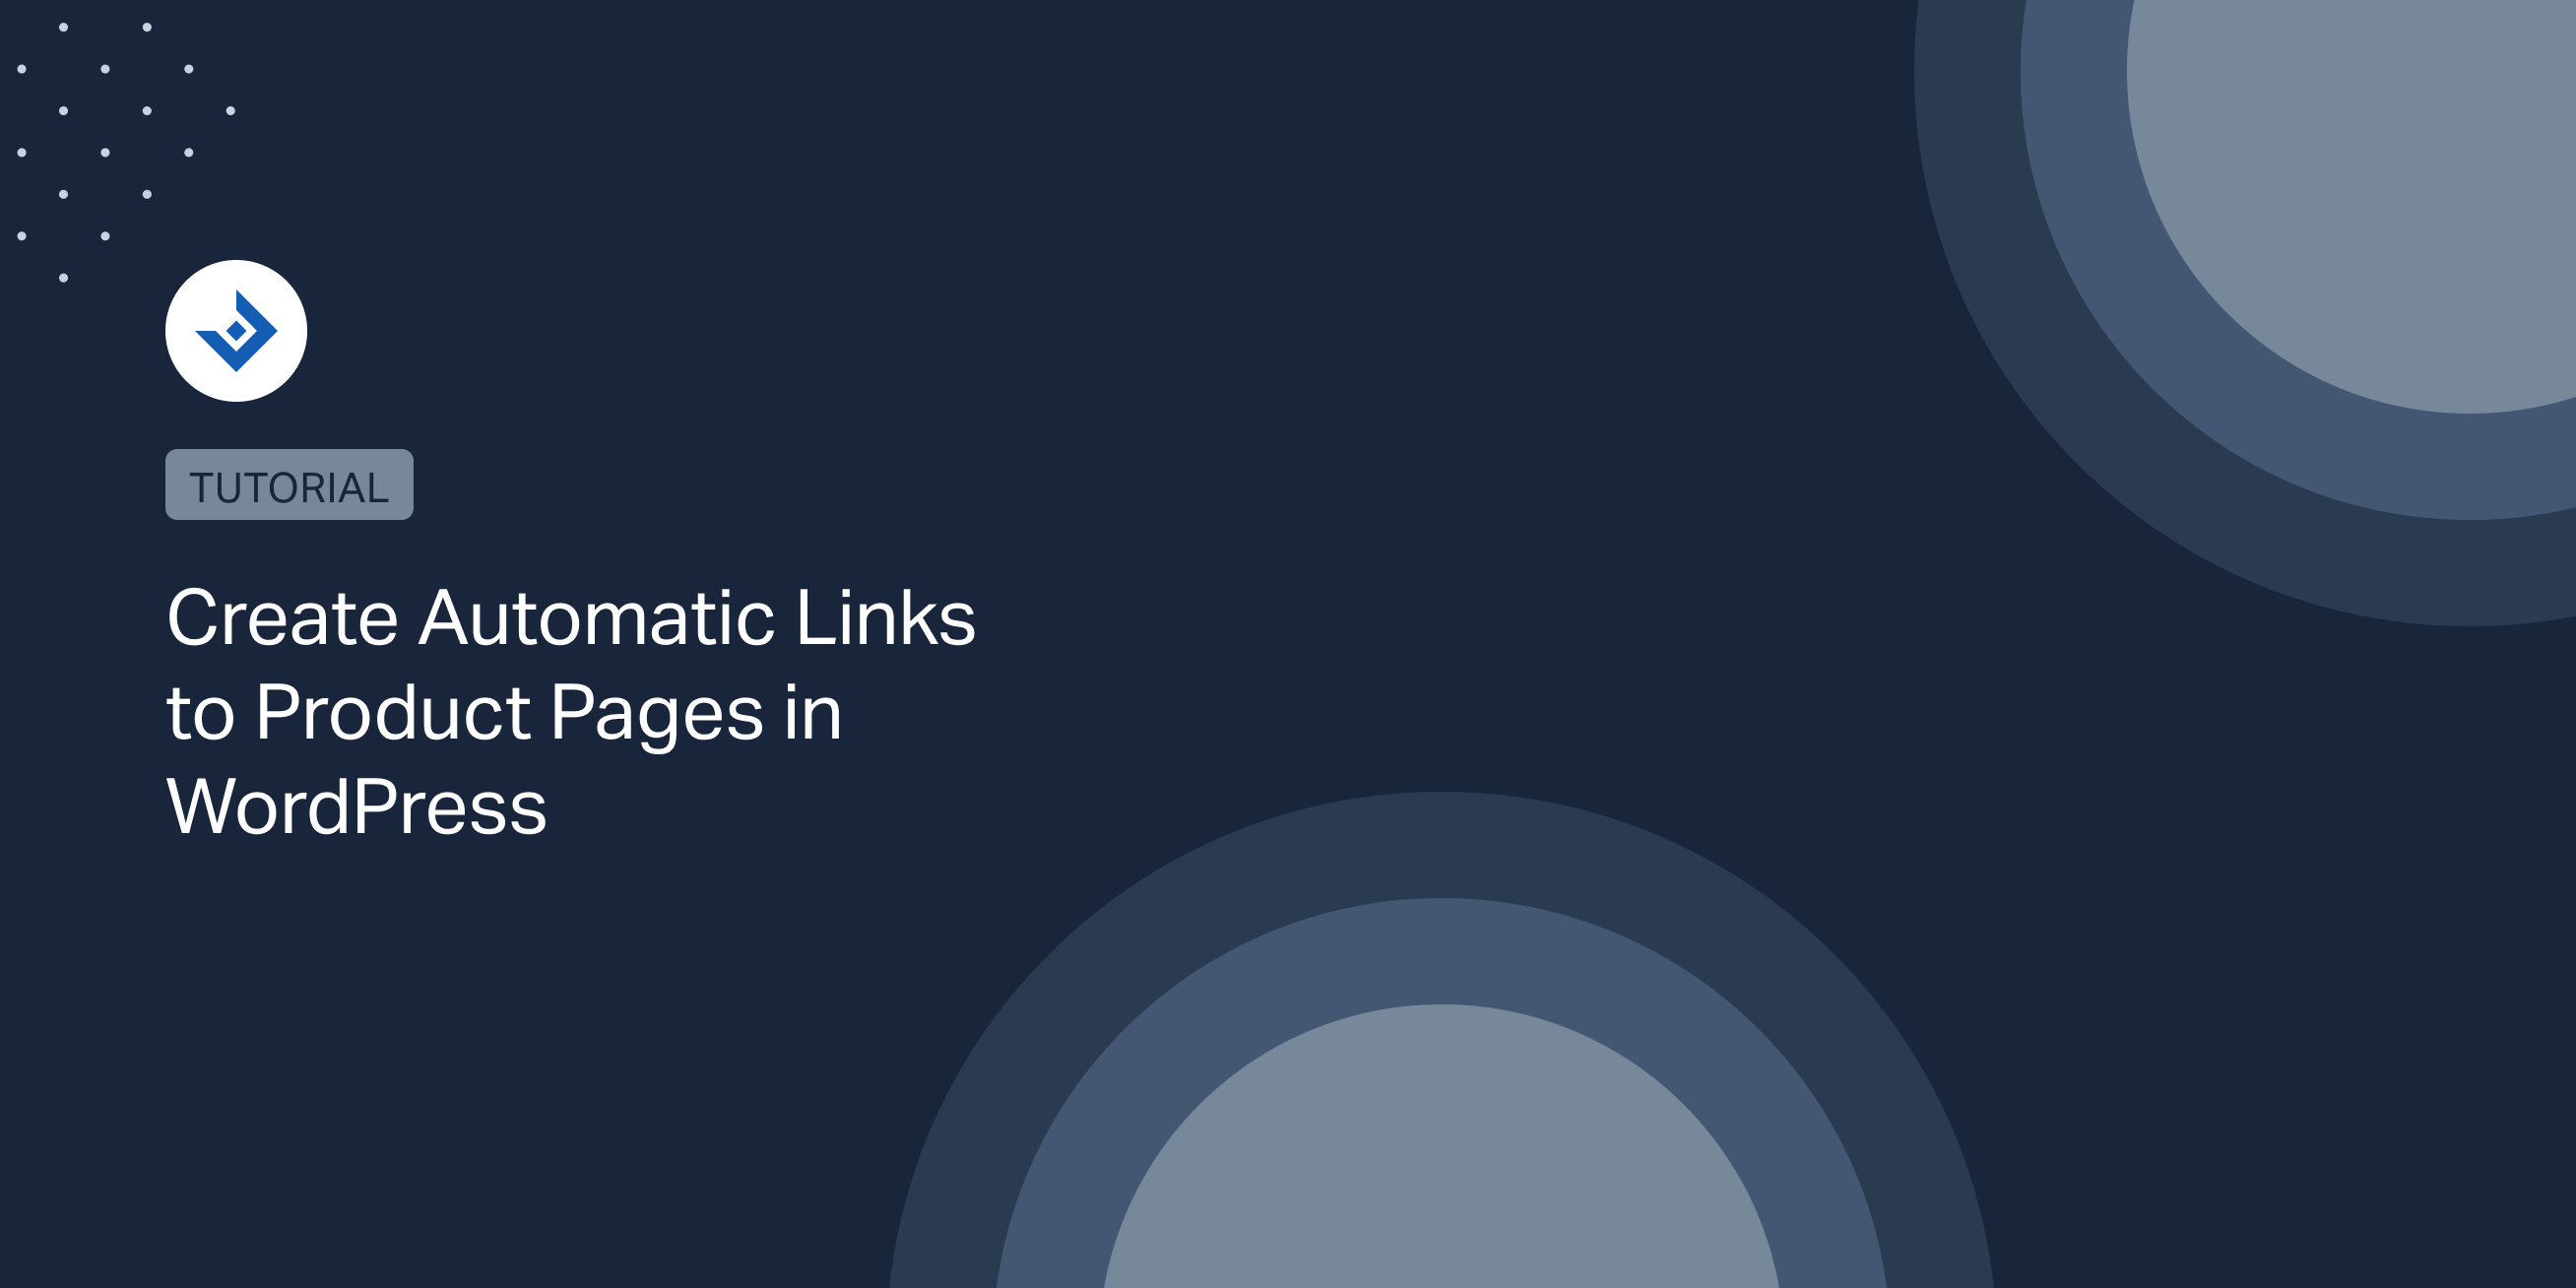 Create Automatic Links to Product Pages in WordPress